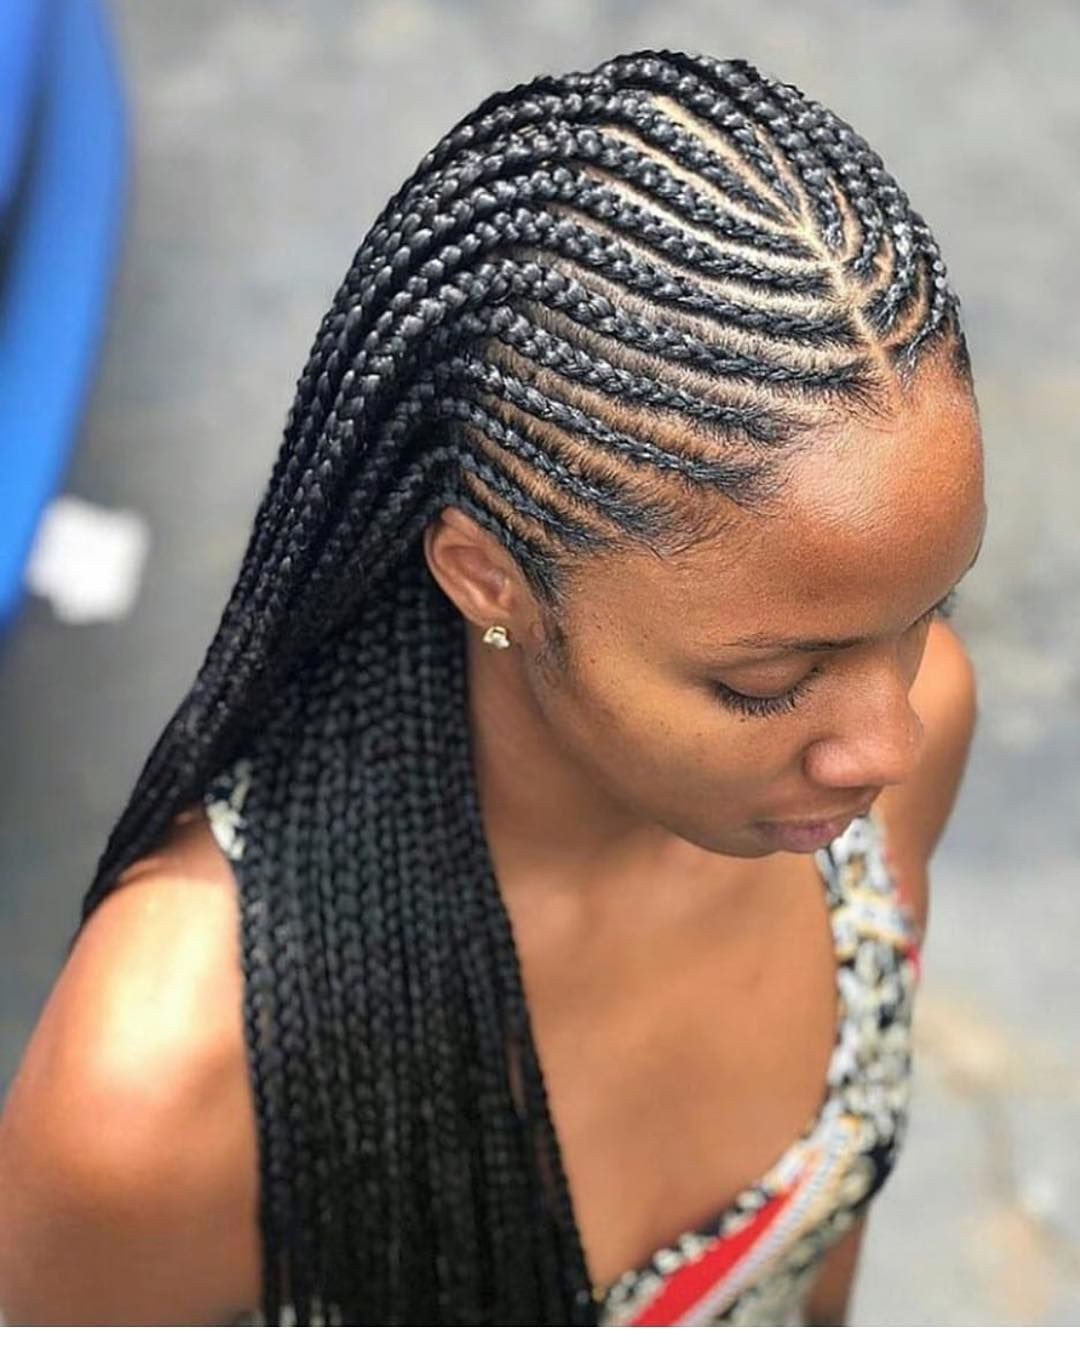 Braids Hairstyles
 35 Lemonade Braids Styles for Protective Styling